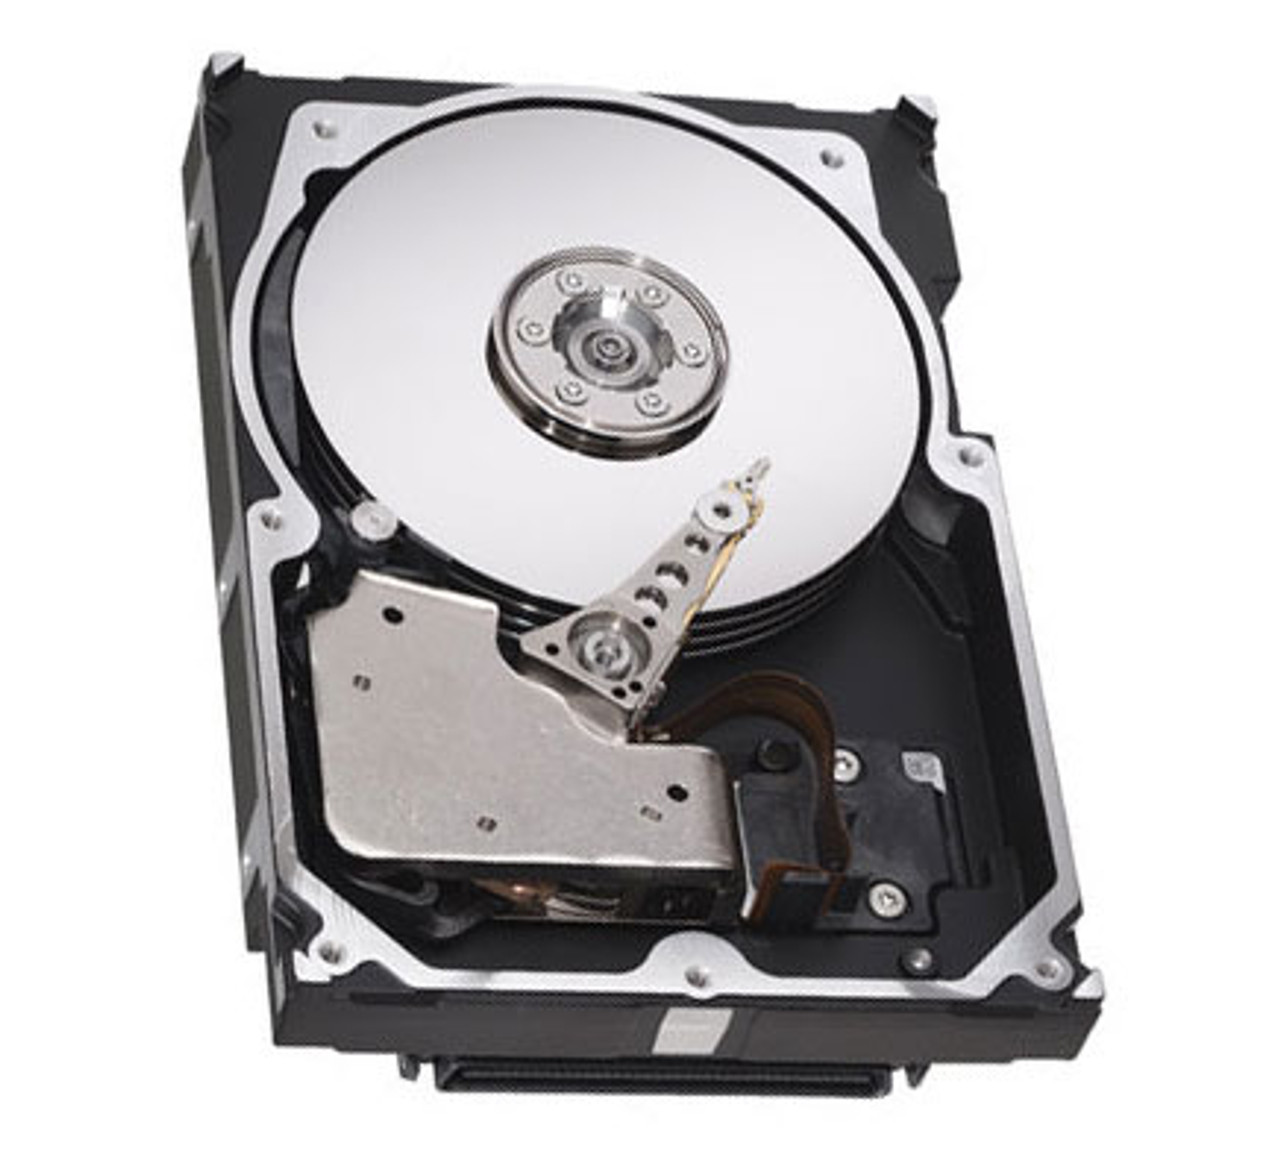 004GTW Dell 18GB 10000RPM Ultra-160 SCSI 80-Pin 3.5-inch Internal Hard Drive for PowerEdge 4400